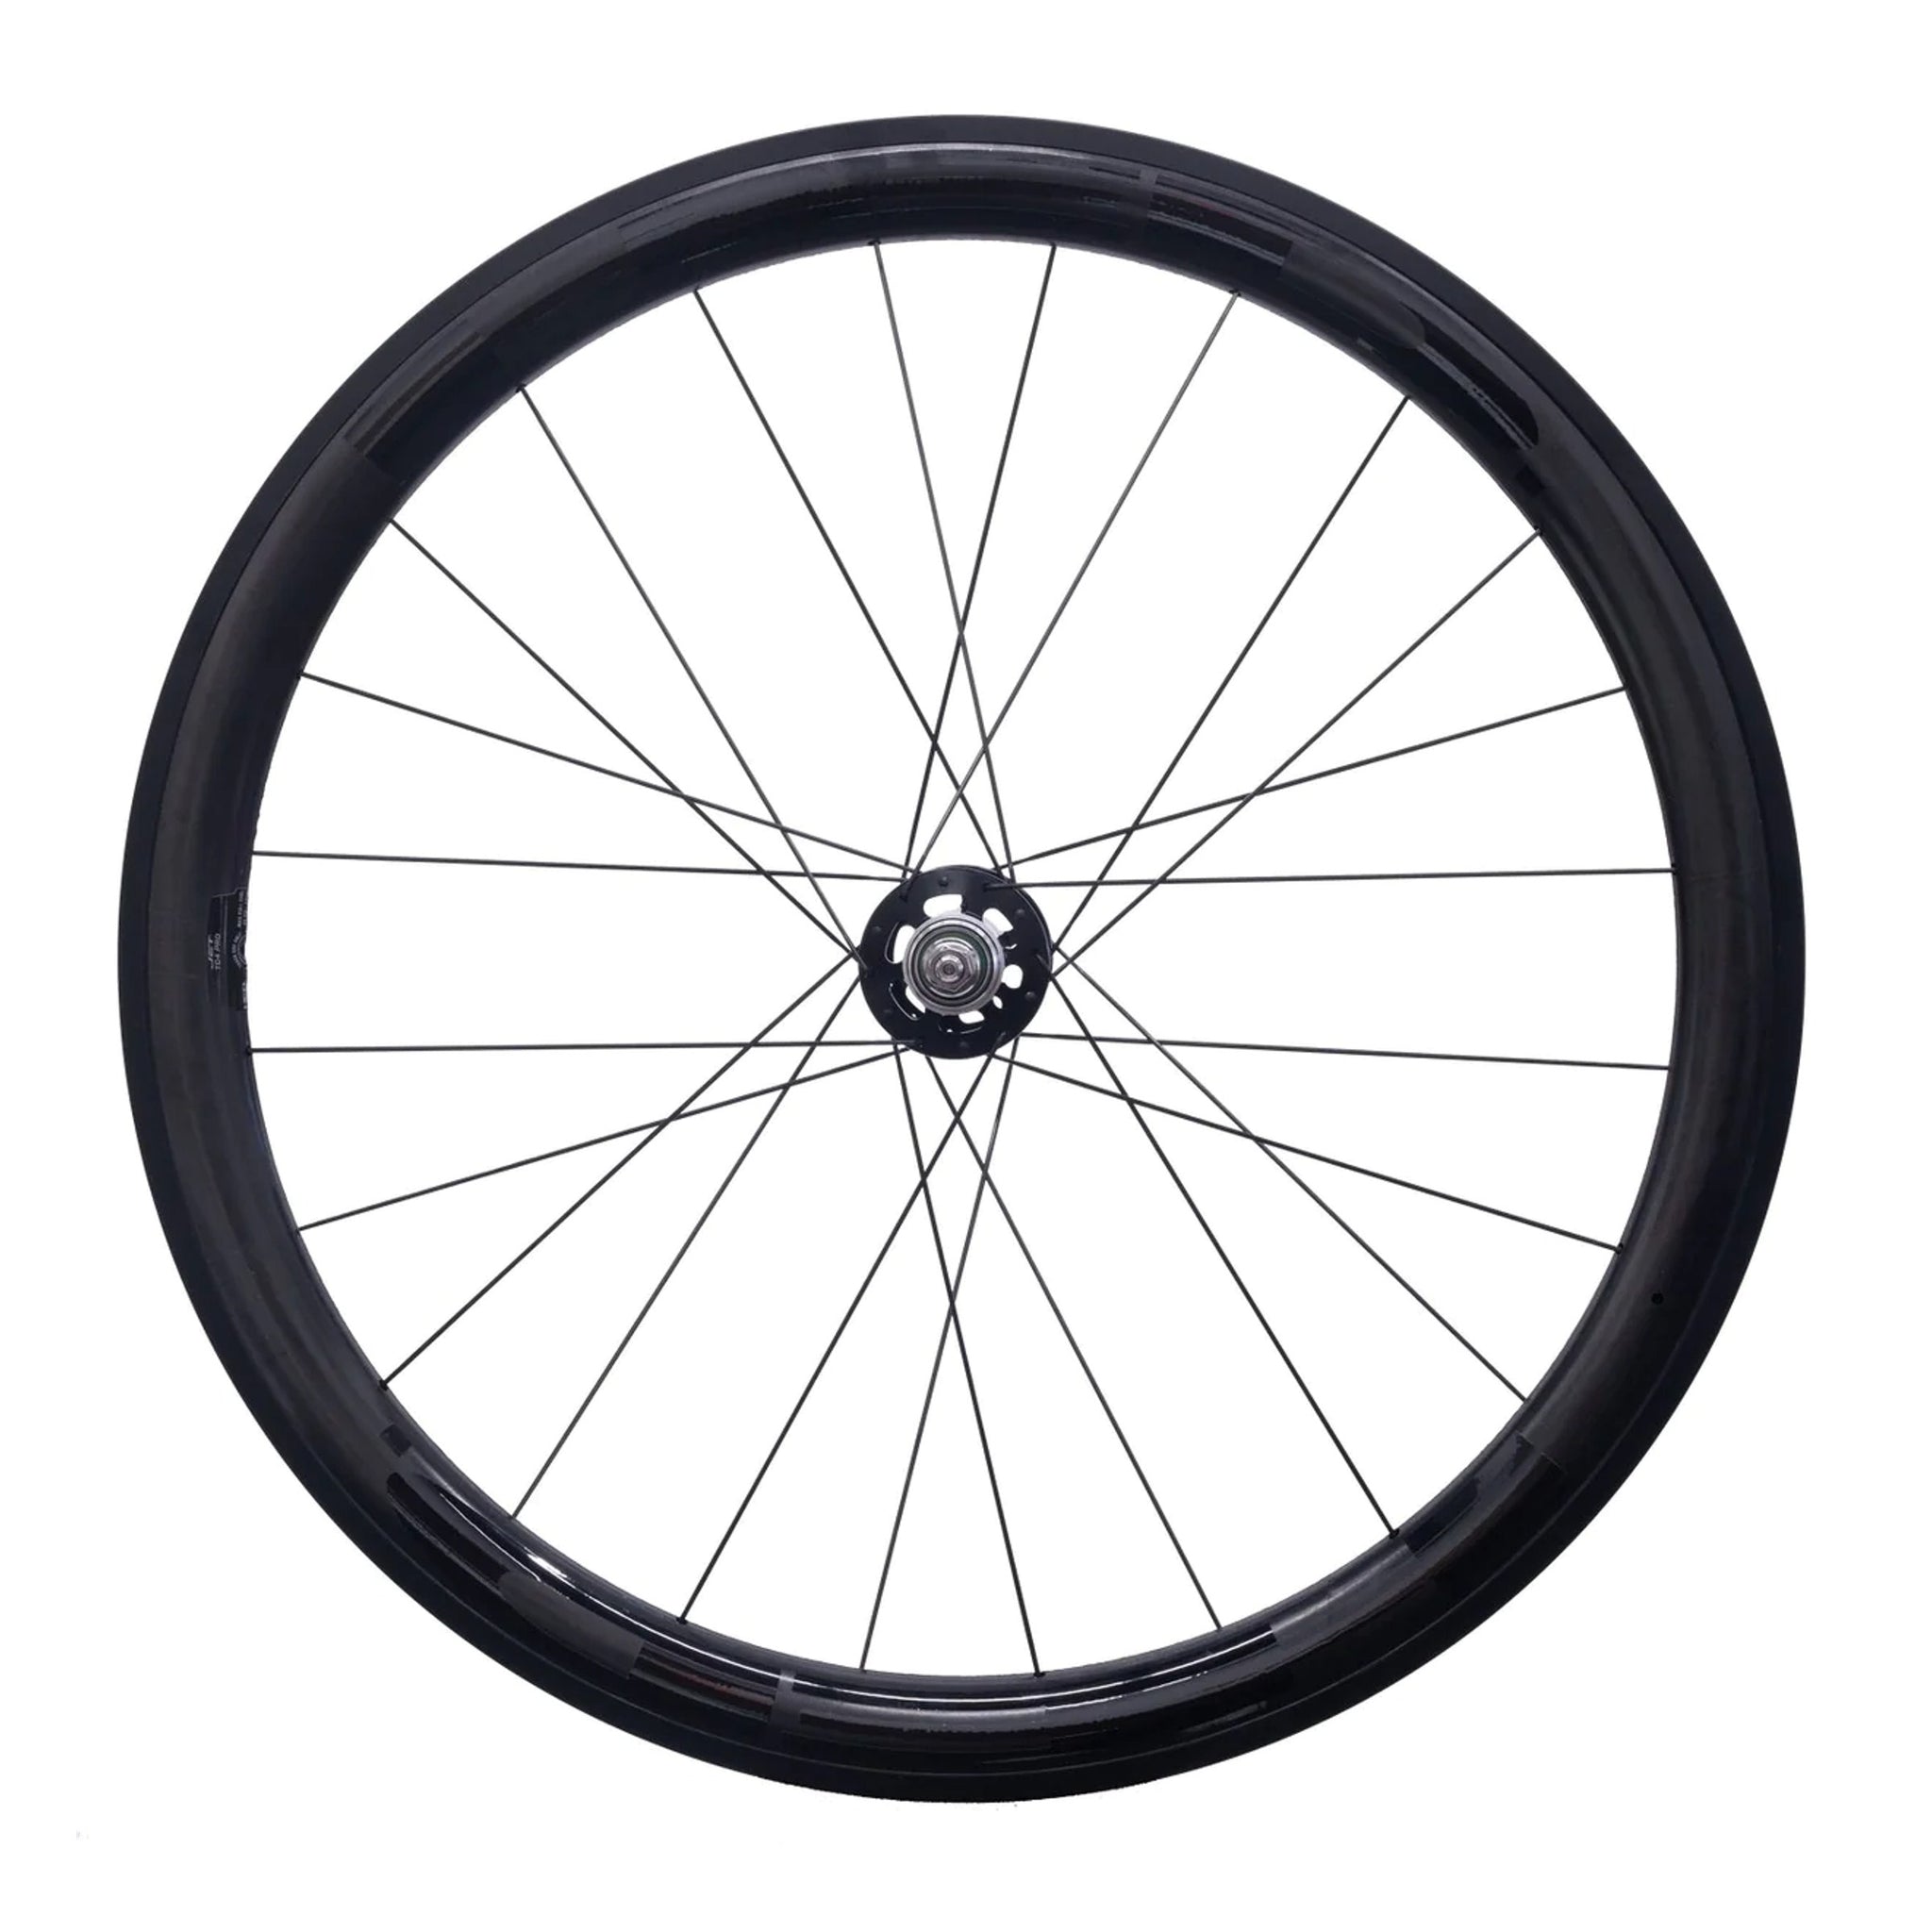 HED Jet 4 carbon track wheel - Retrogression Fixed Gear